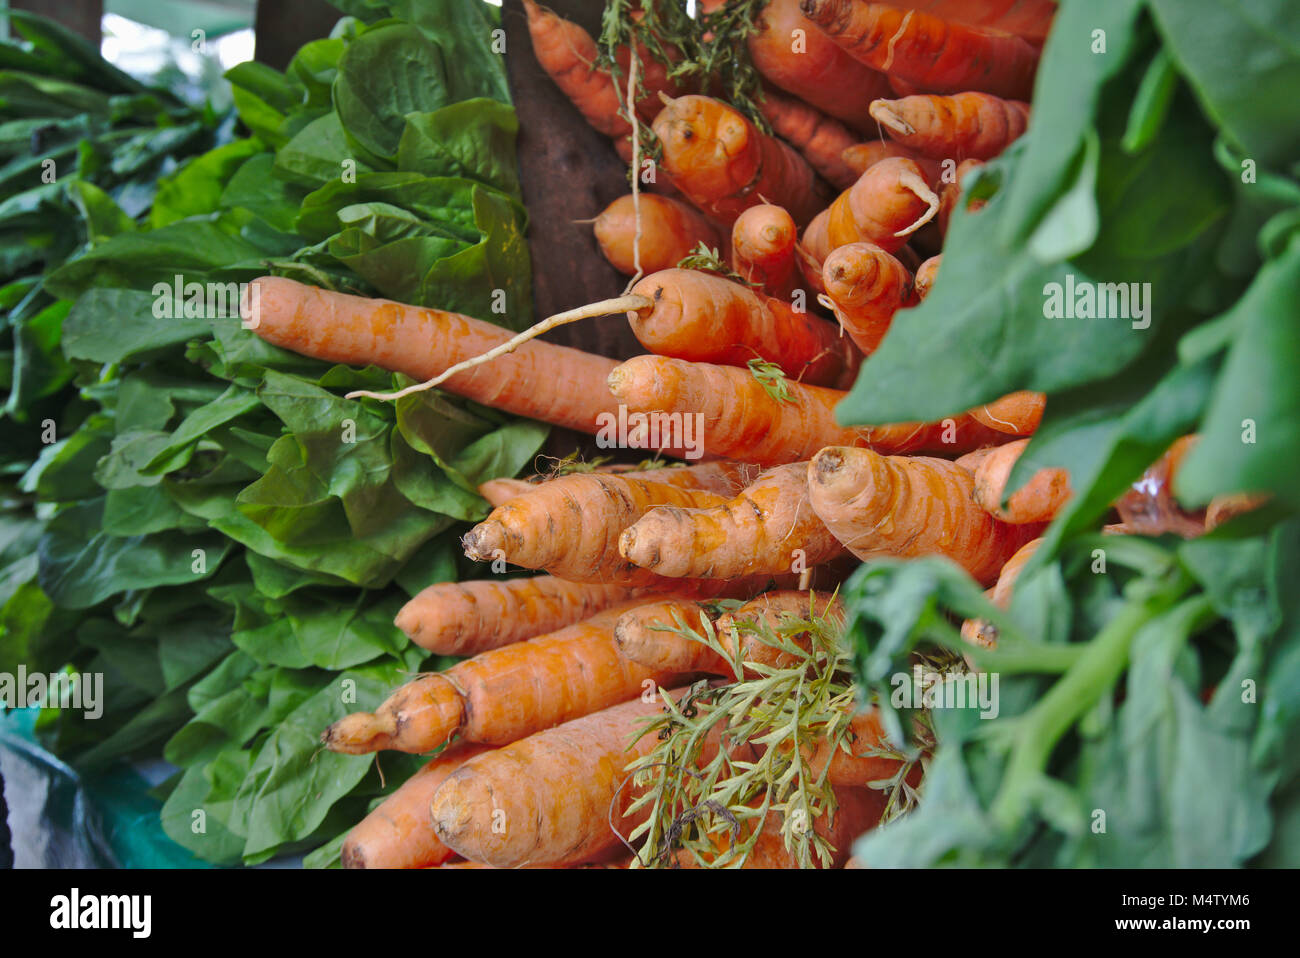 Carrots at a farmers market stall. Stock Photo